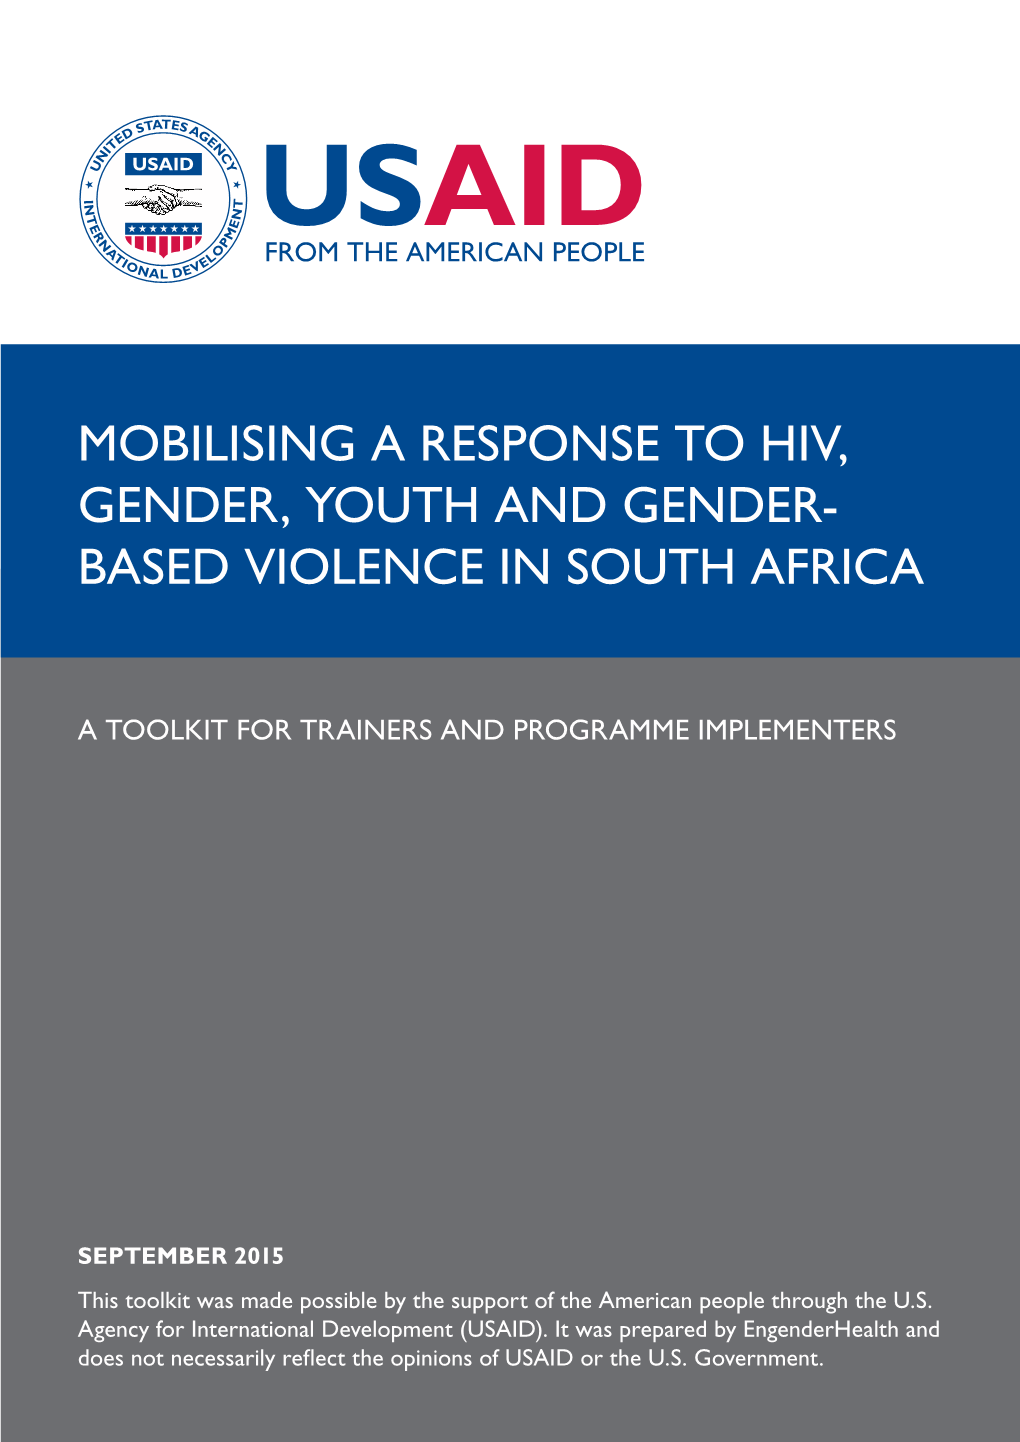 Mobilising a Response to HIV, Gender, Youth and Gender-Based Violence in South Africa: a Toolkit for Trainers and Programme Implementers